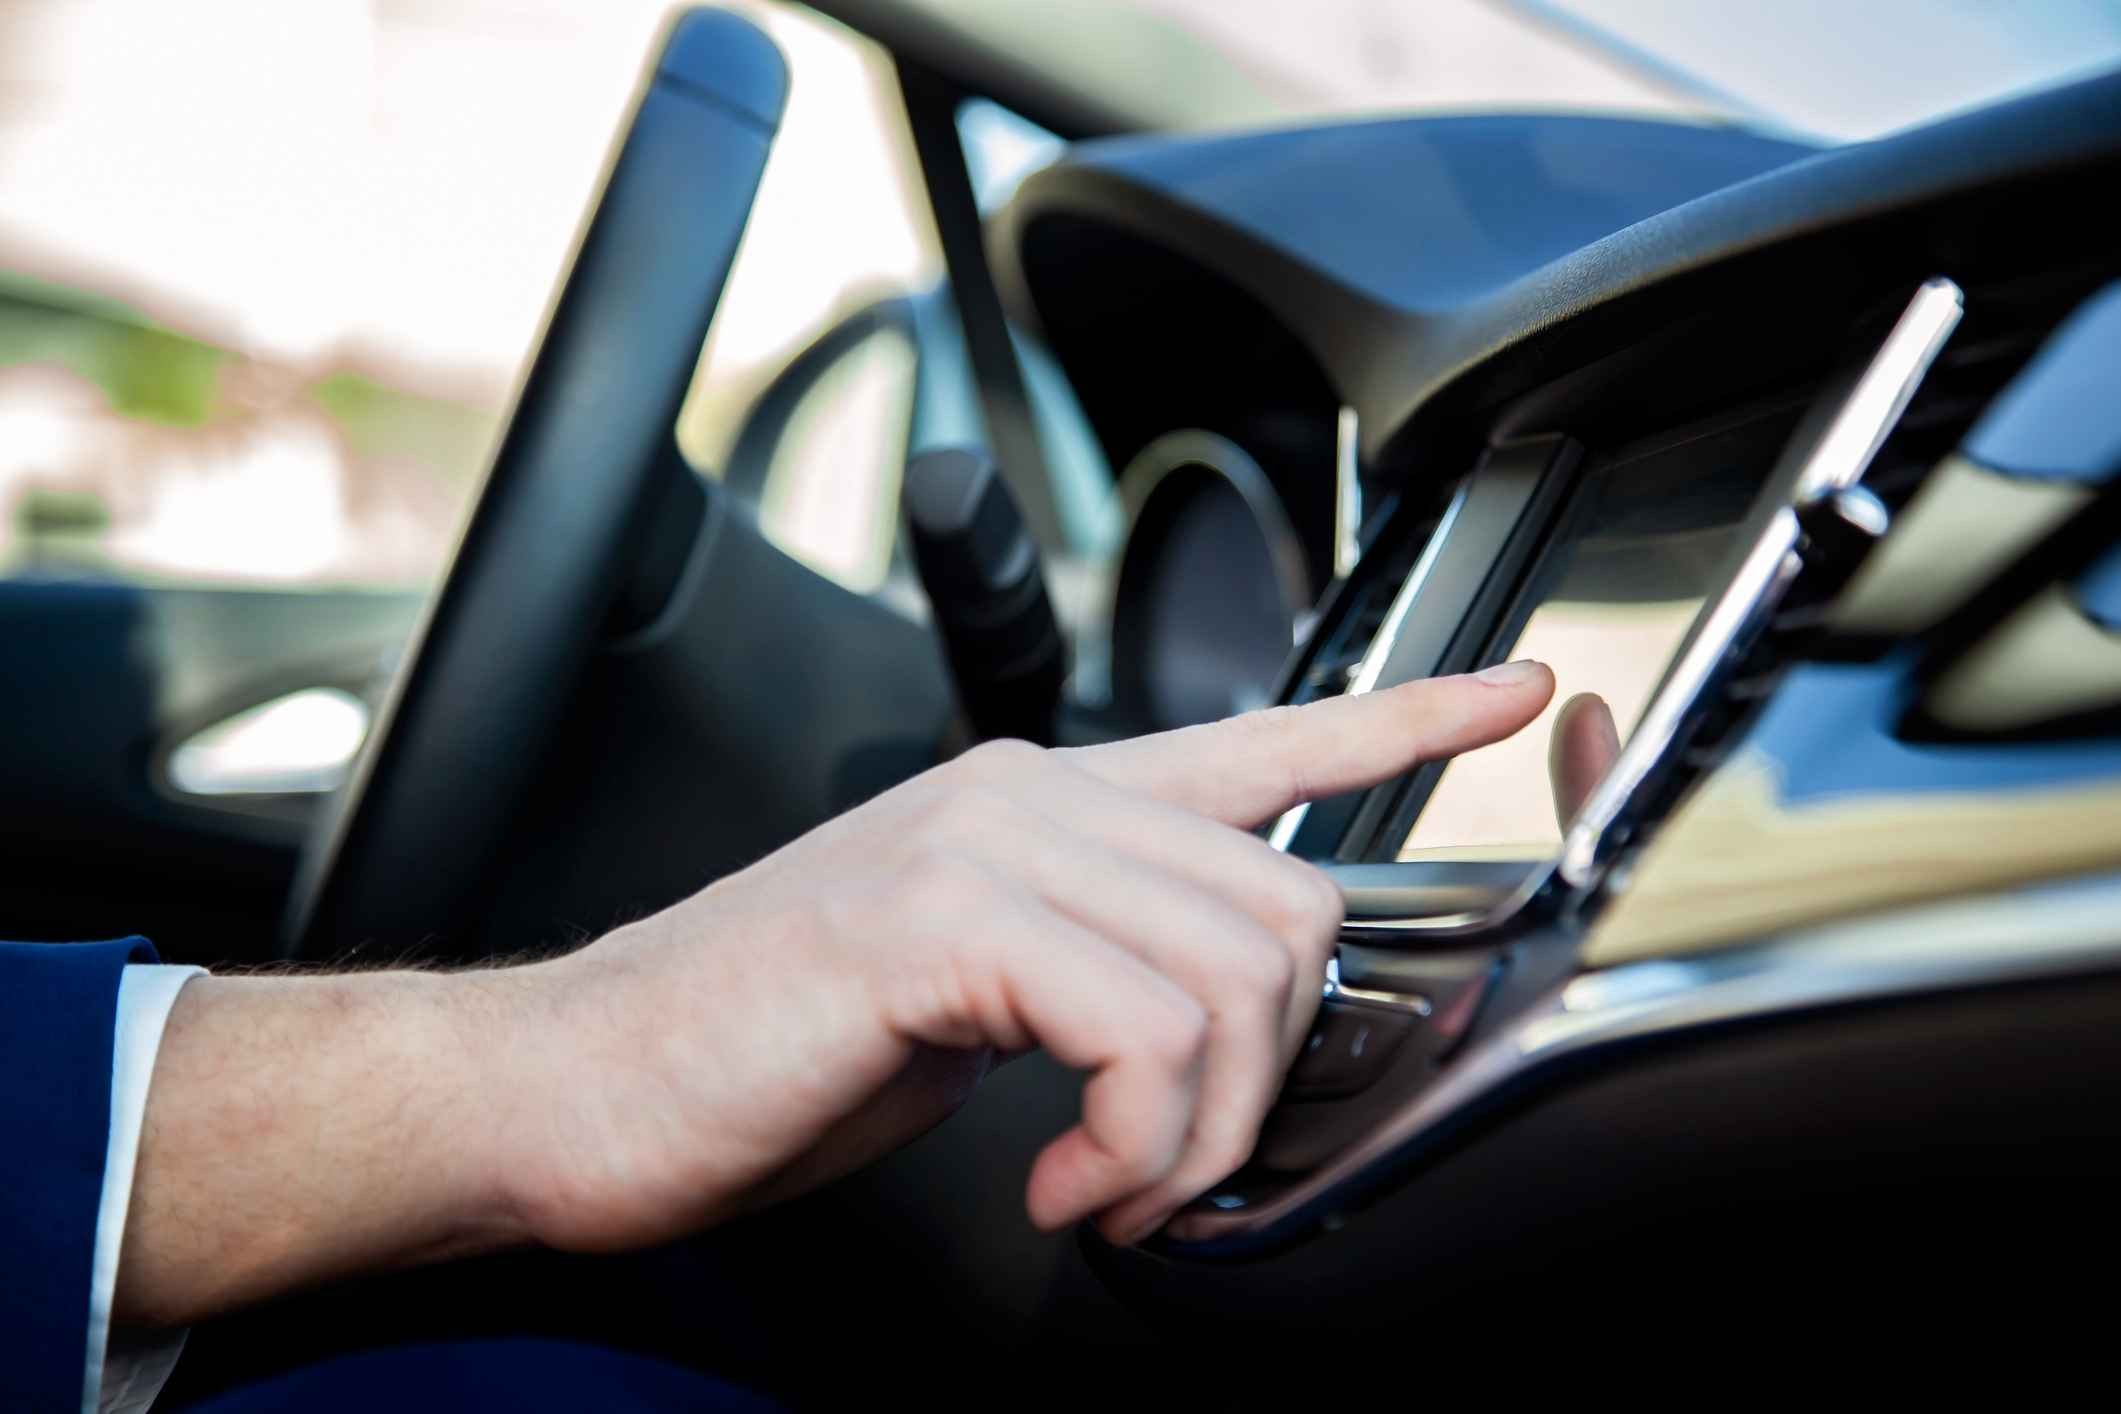 A haptic car touch screen